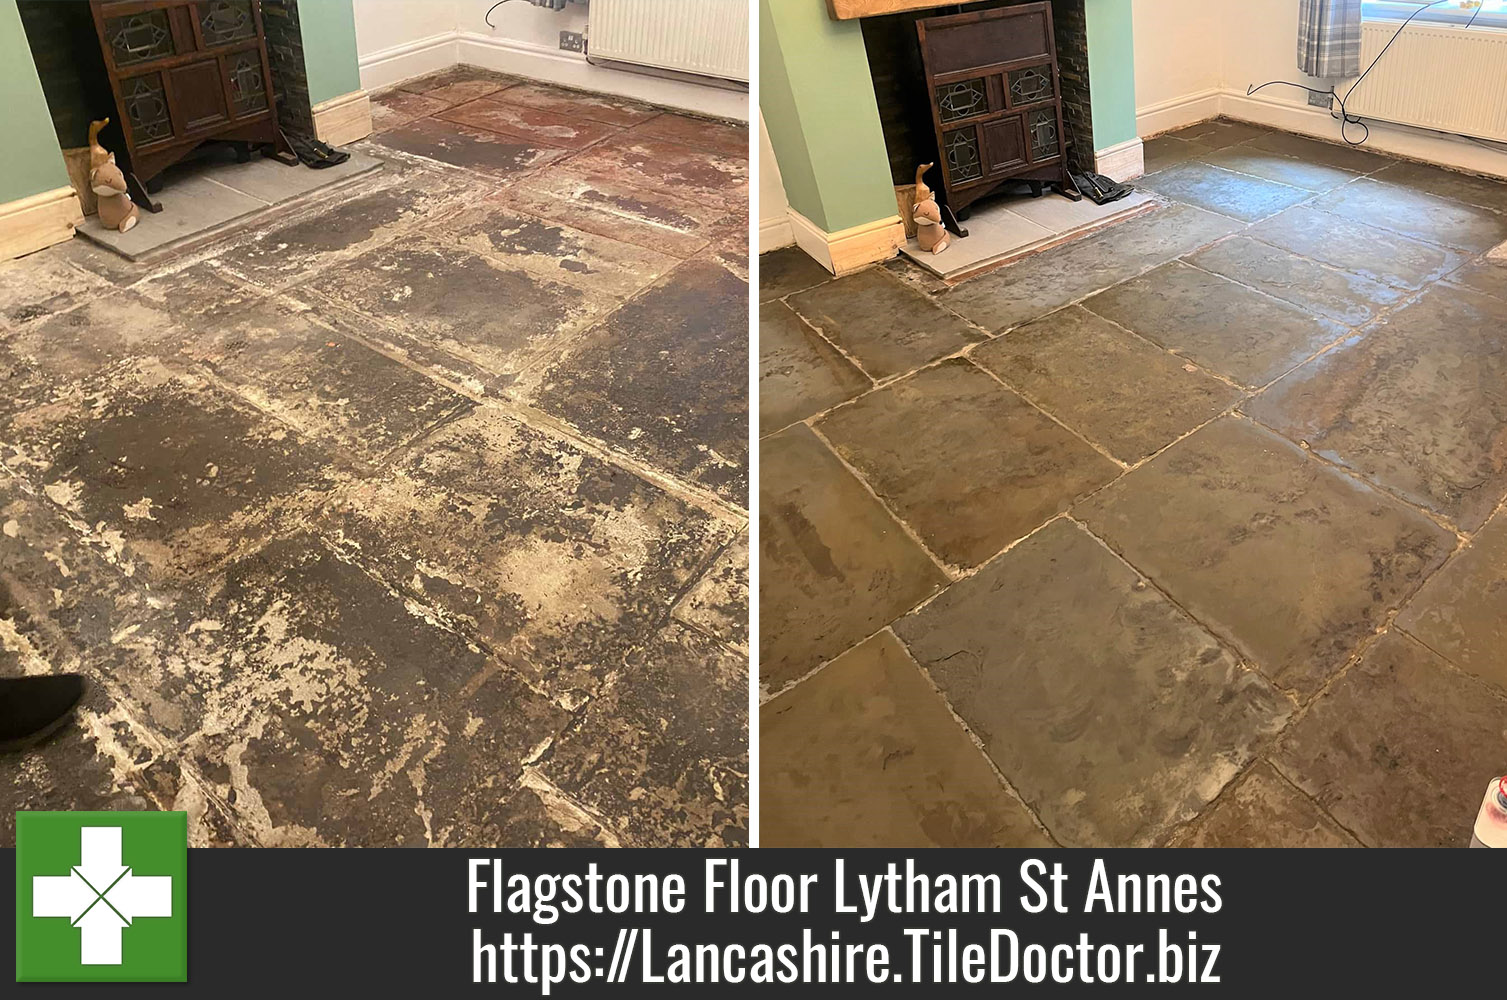 Resurfacing Flagstone Flooring using Tile Doctor Milling Pads in Lytham St Anne South Lancashire